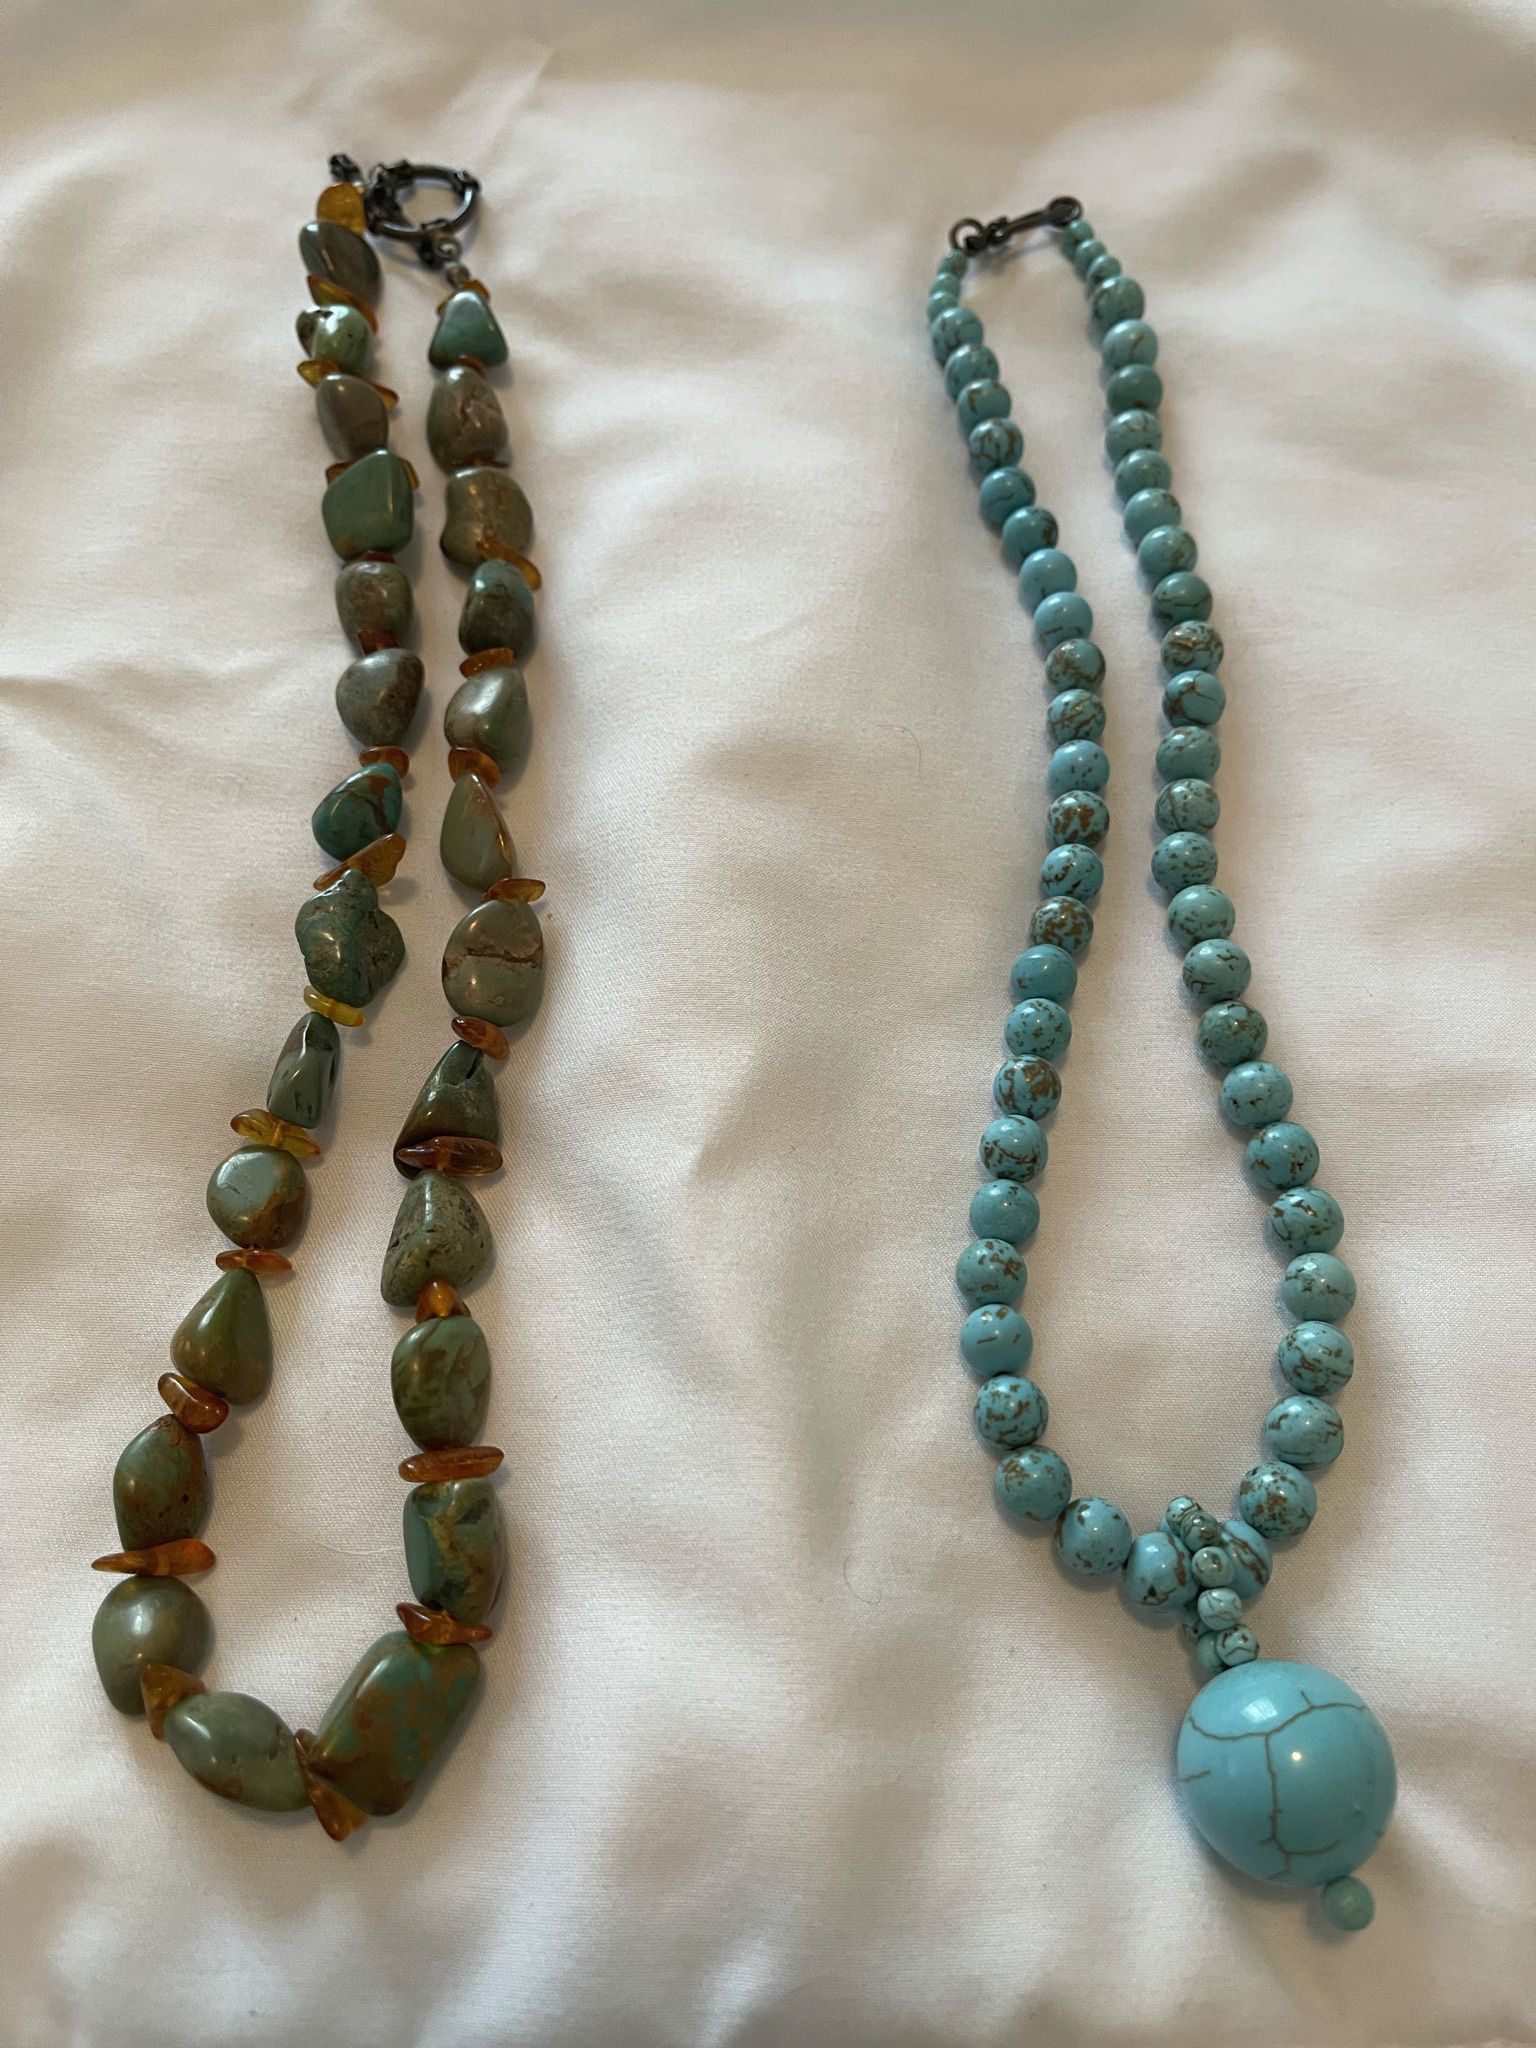 Real Turquoise Necklaces - $20 Each